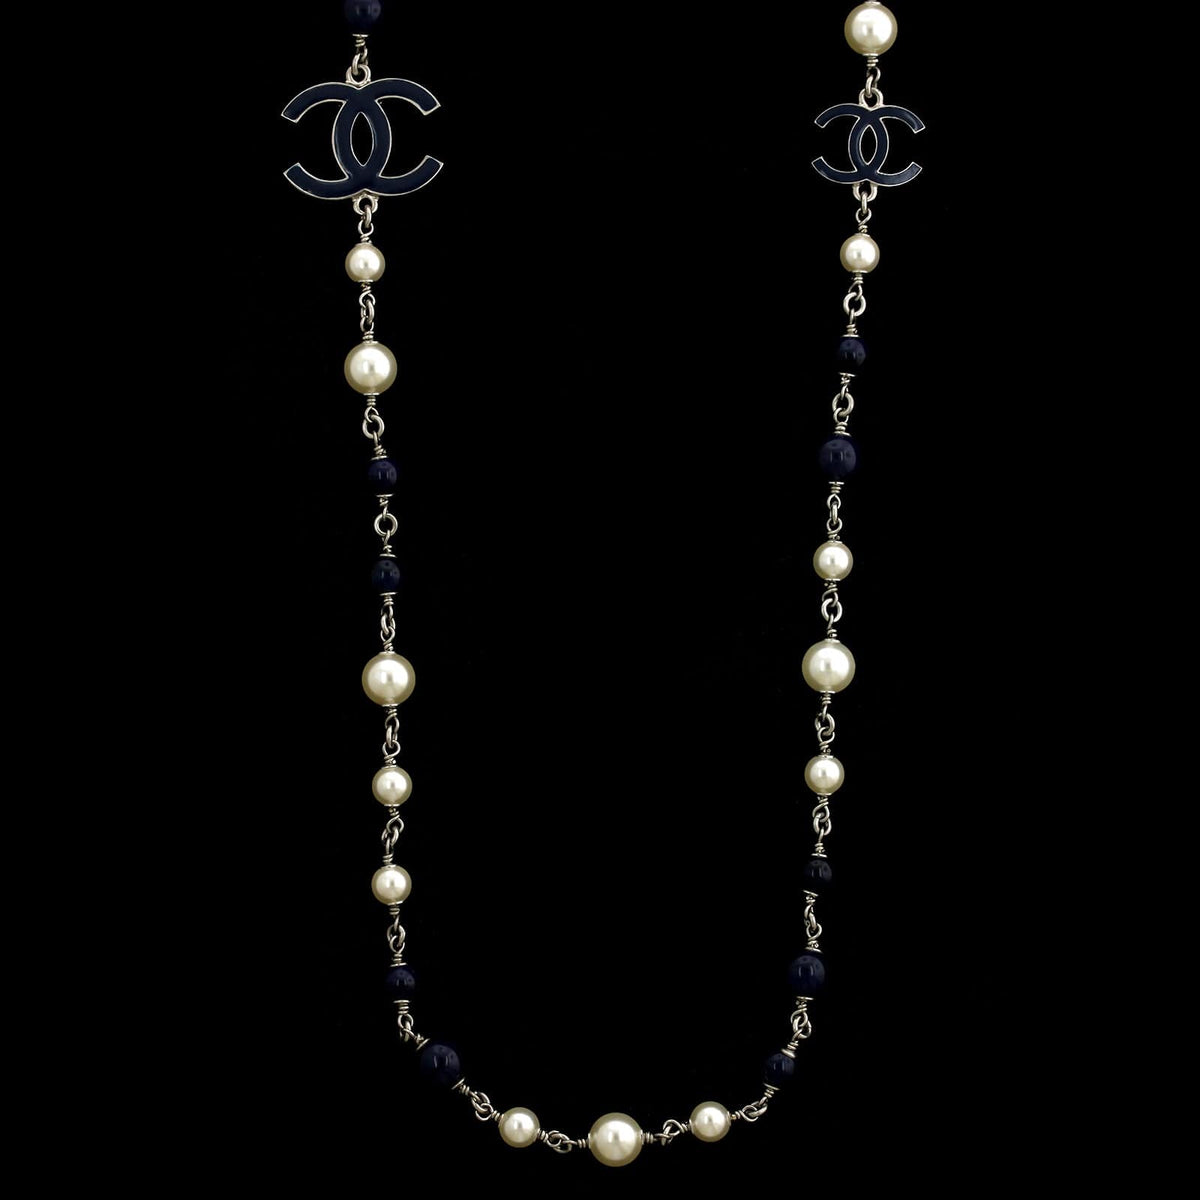 Chanel Three CC Logo Estate Blue Bead and Faux Pearl Necklace